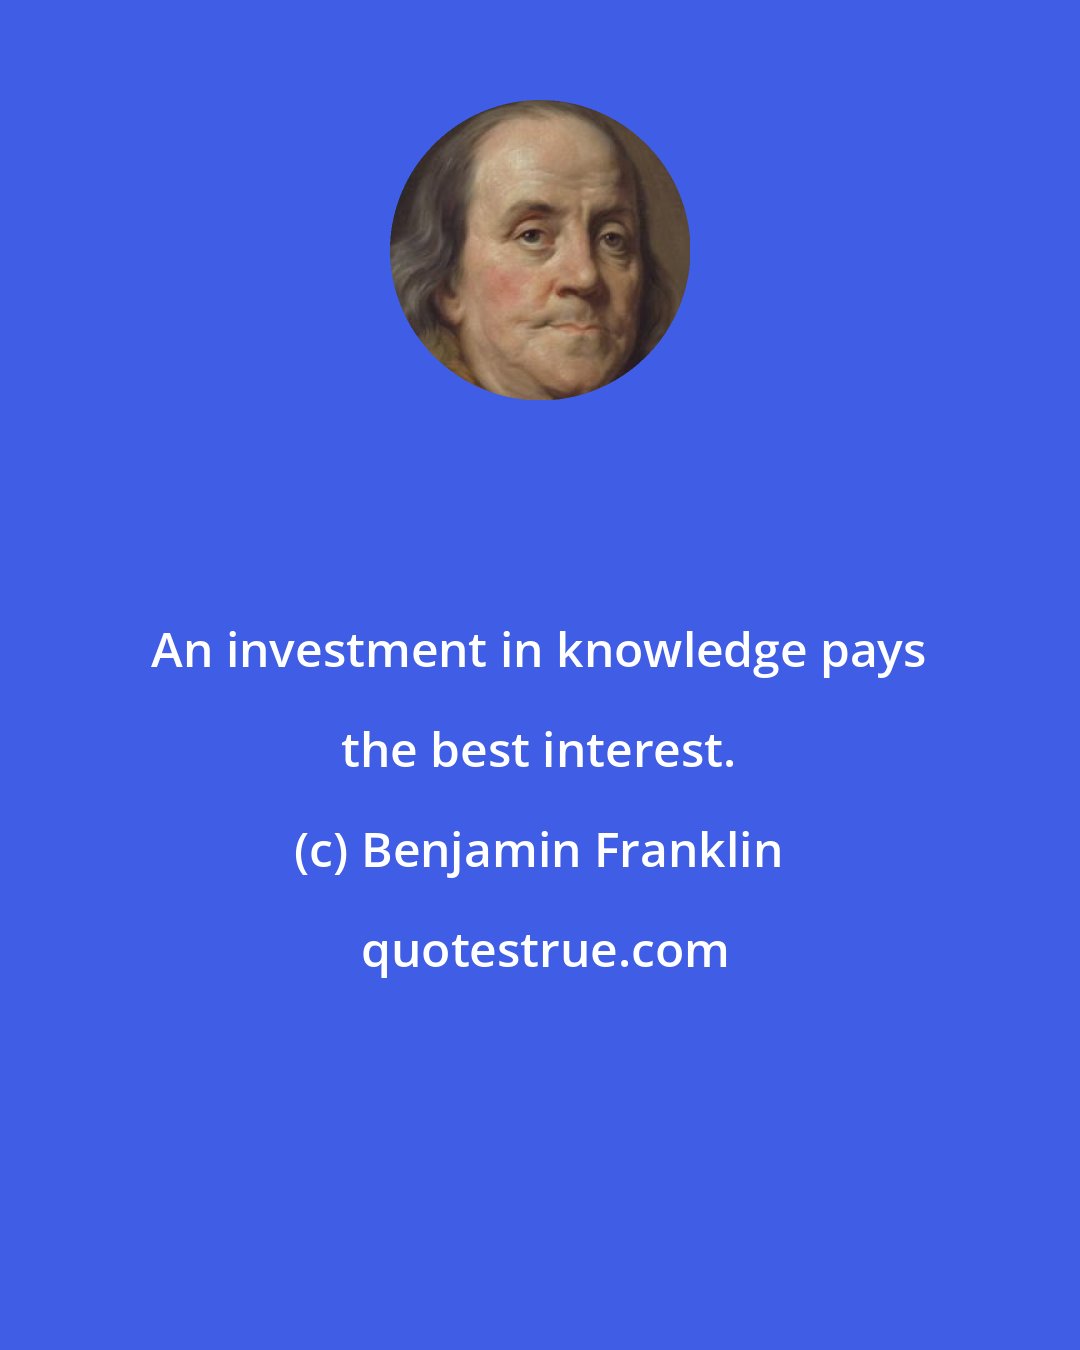 Benjamin Franklin: An investment in knowledge pays the best interest.